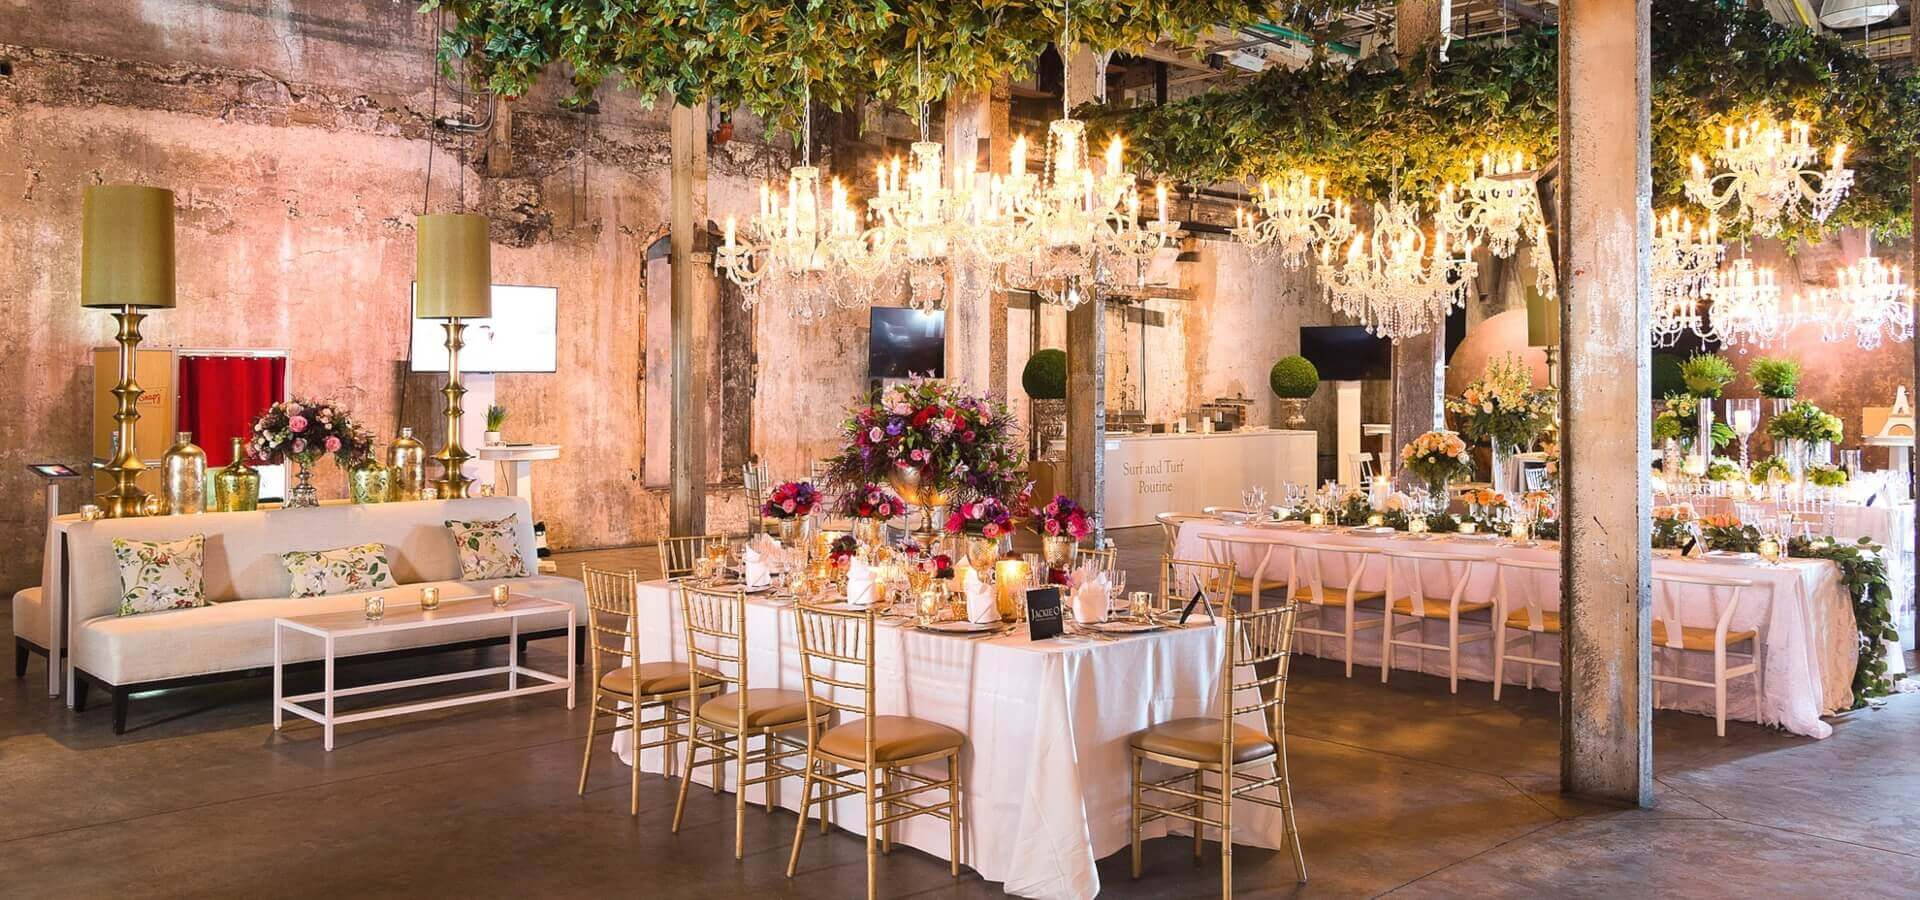 Hero image for An Enchanted Garden-Themed Wedding Open House at The Fermenting Cellar